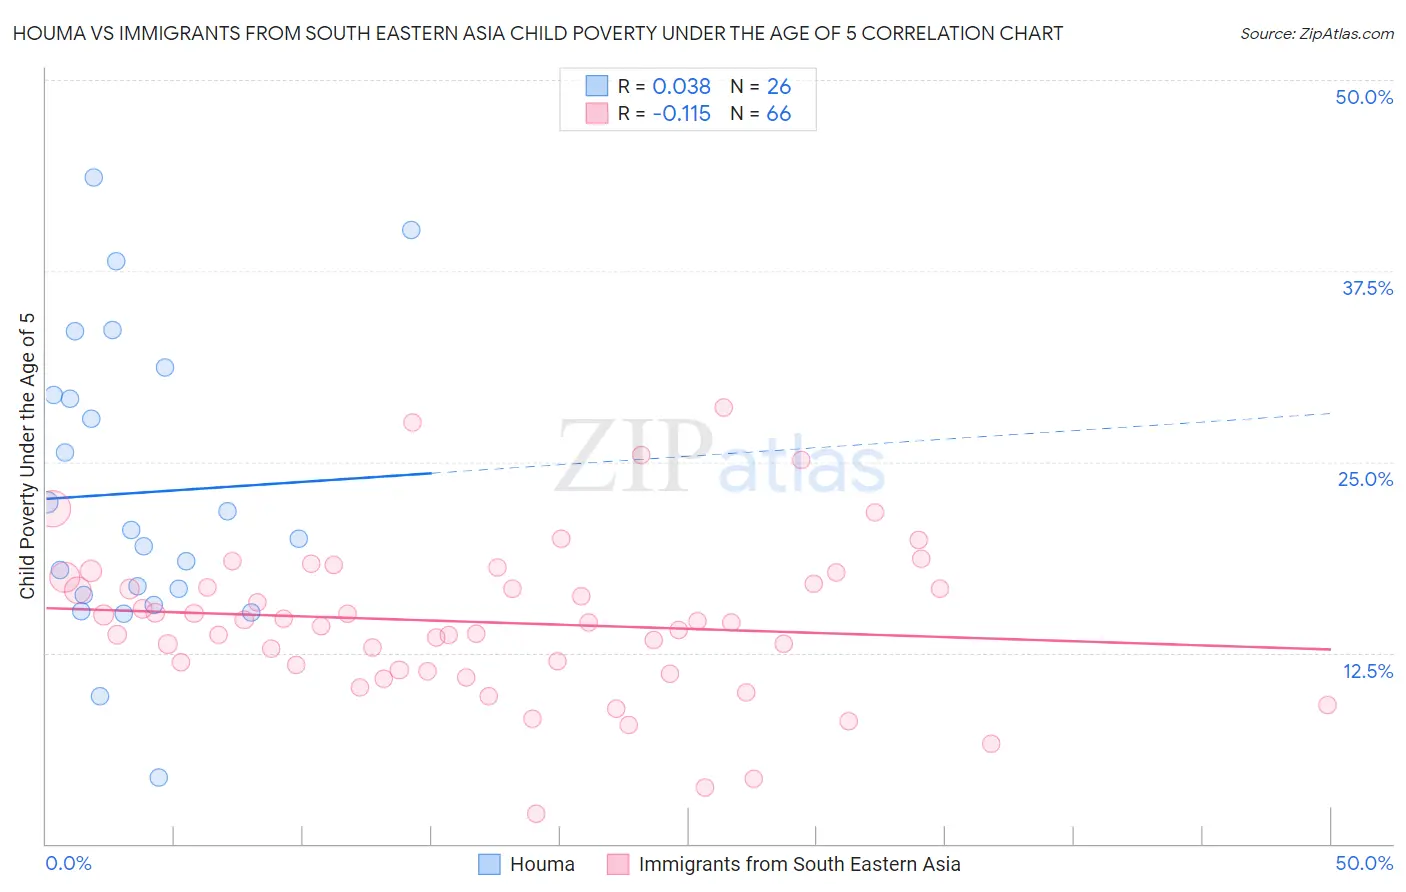 Houma vs Immigrants from South Eastern Asia Child Poverty Under the Age of 5